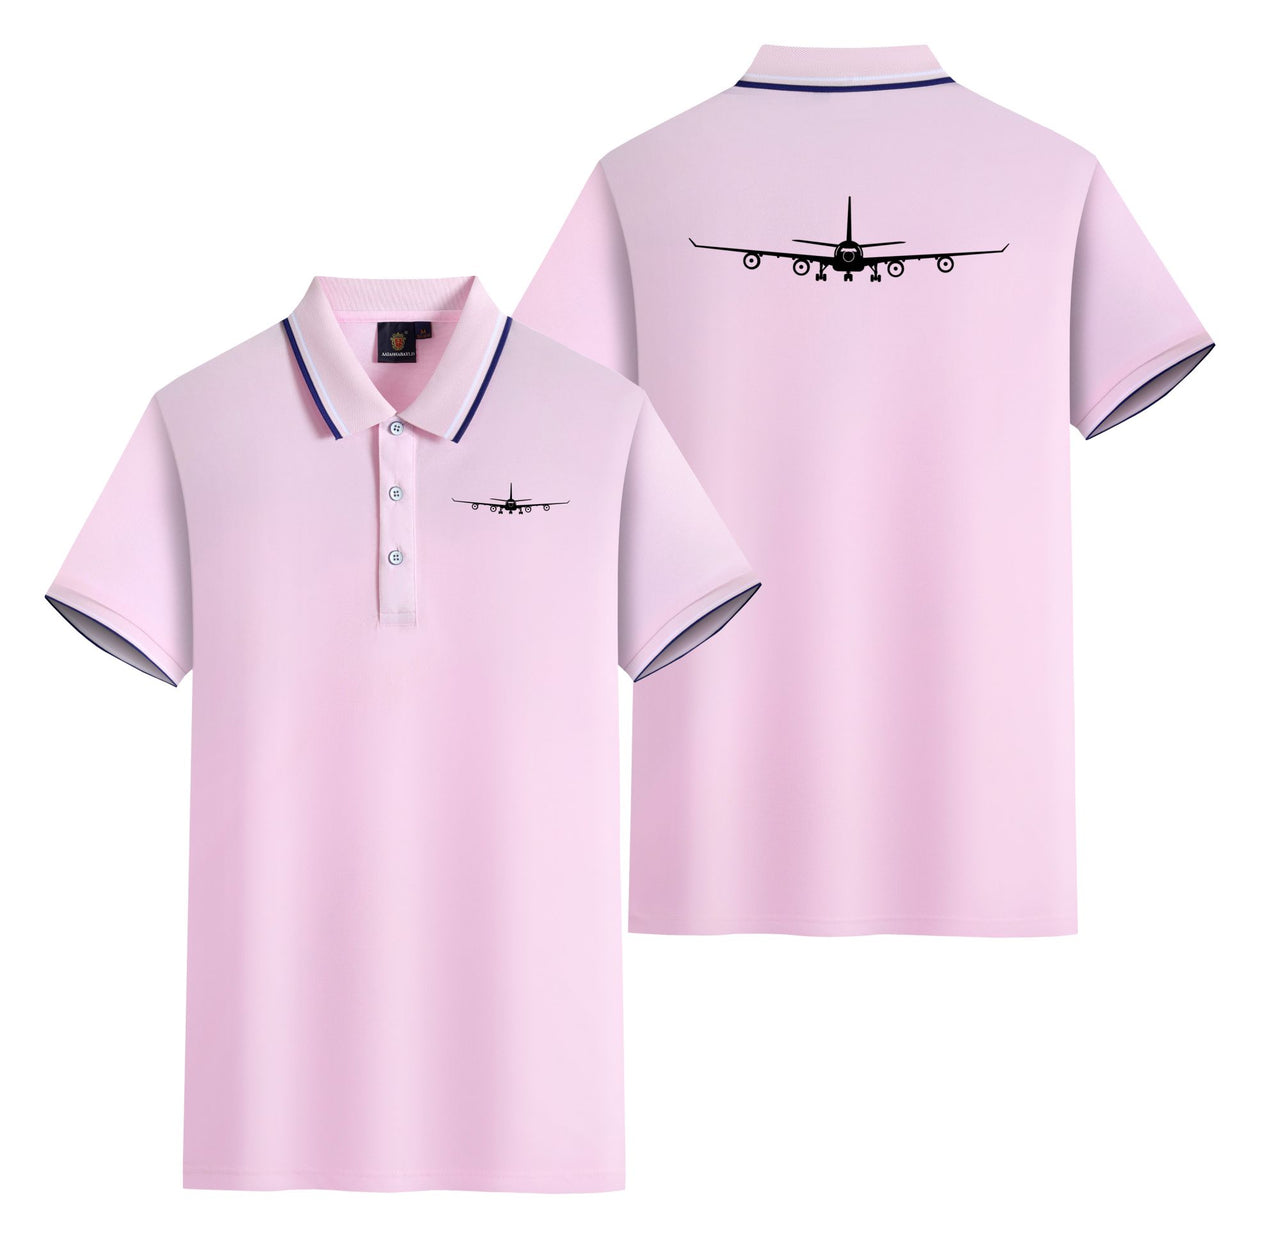 Airbus A340 Silhouette Designed Stylish Polo T-Shirts (Double-Side)